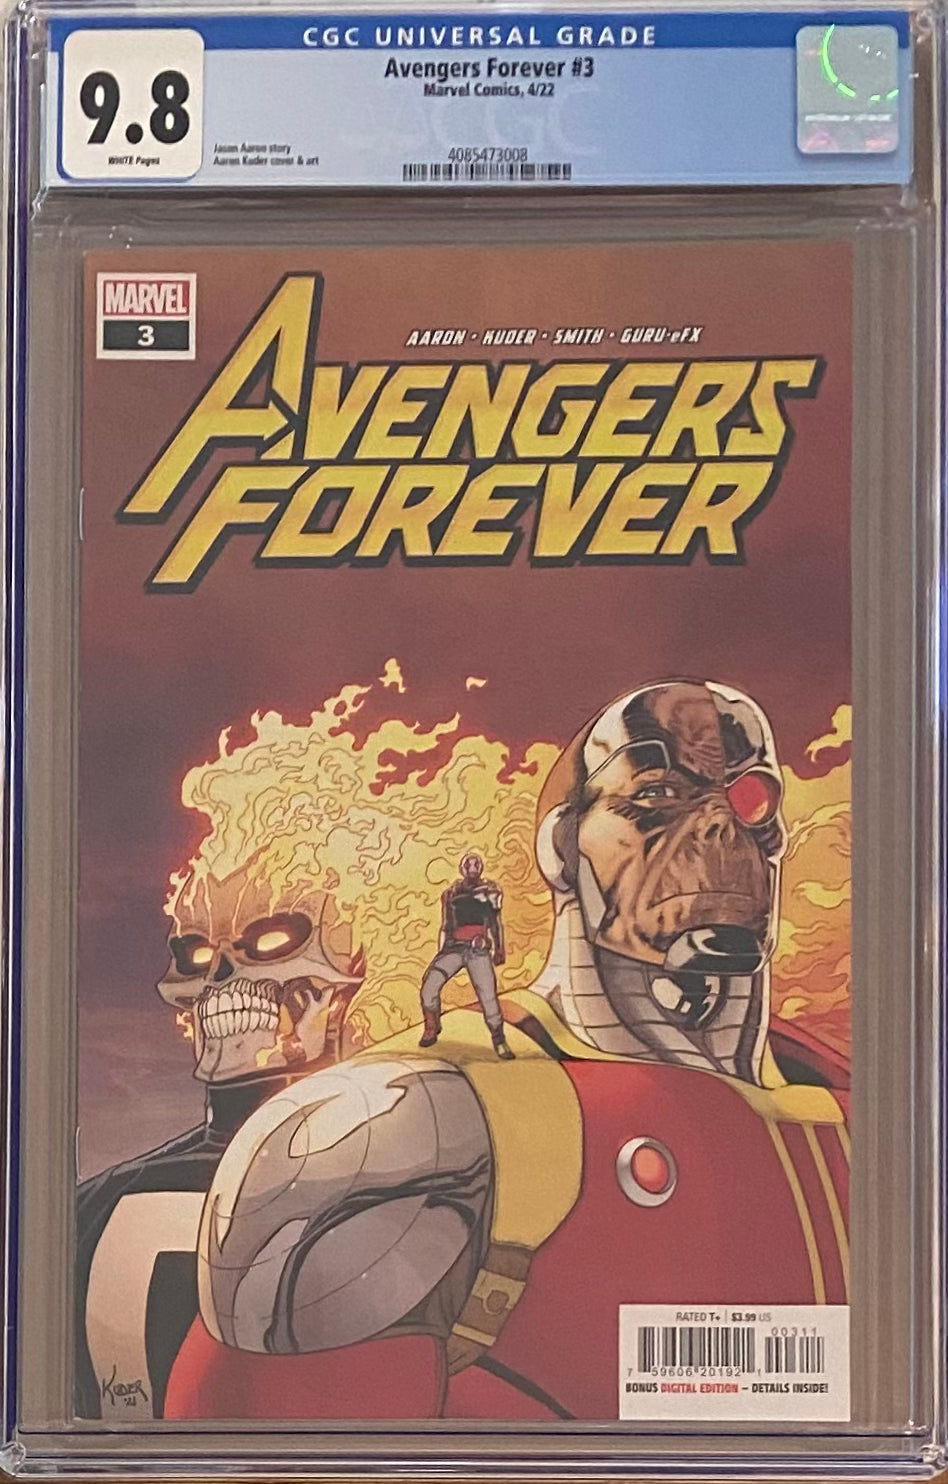 Avengers Forever #3 CGC 9.8 - First Lady Moon Knight